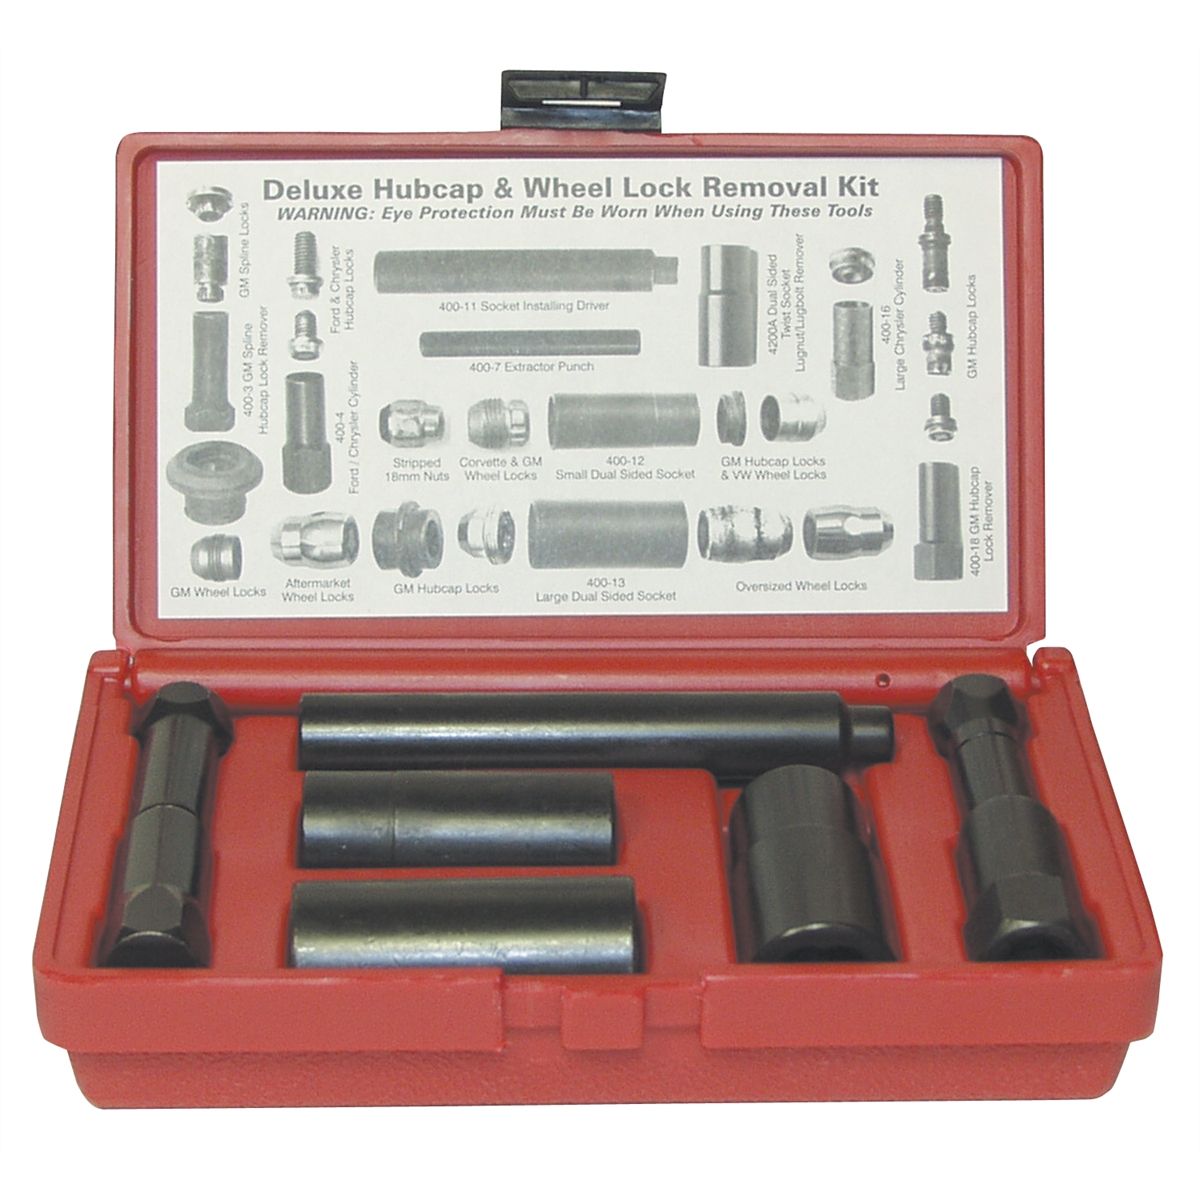 Sunex 2840 9 Piece Hubcap and Wheel Lock Removal Kit